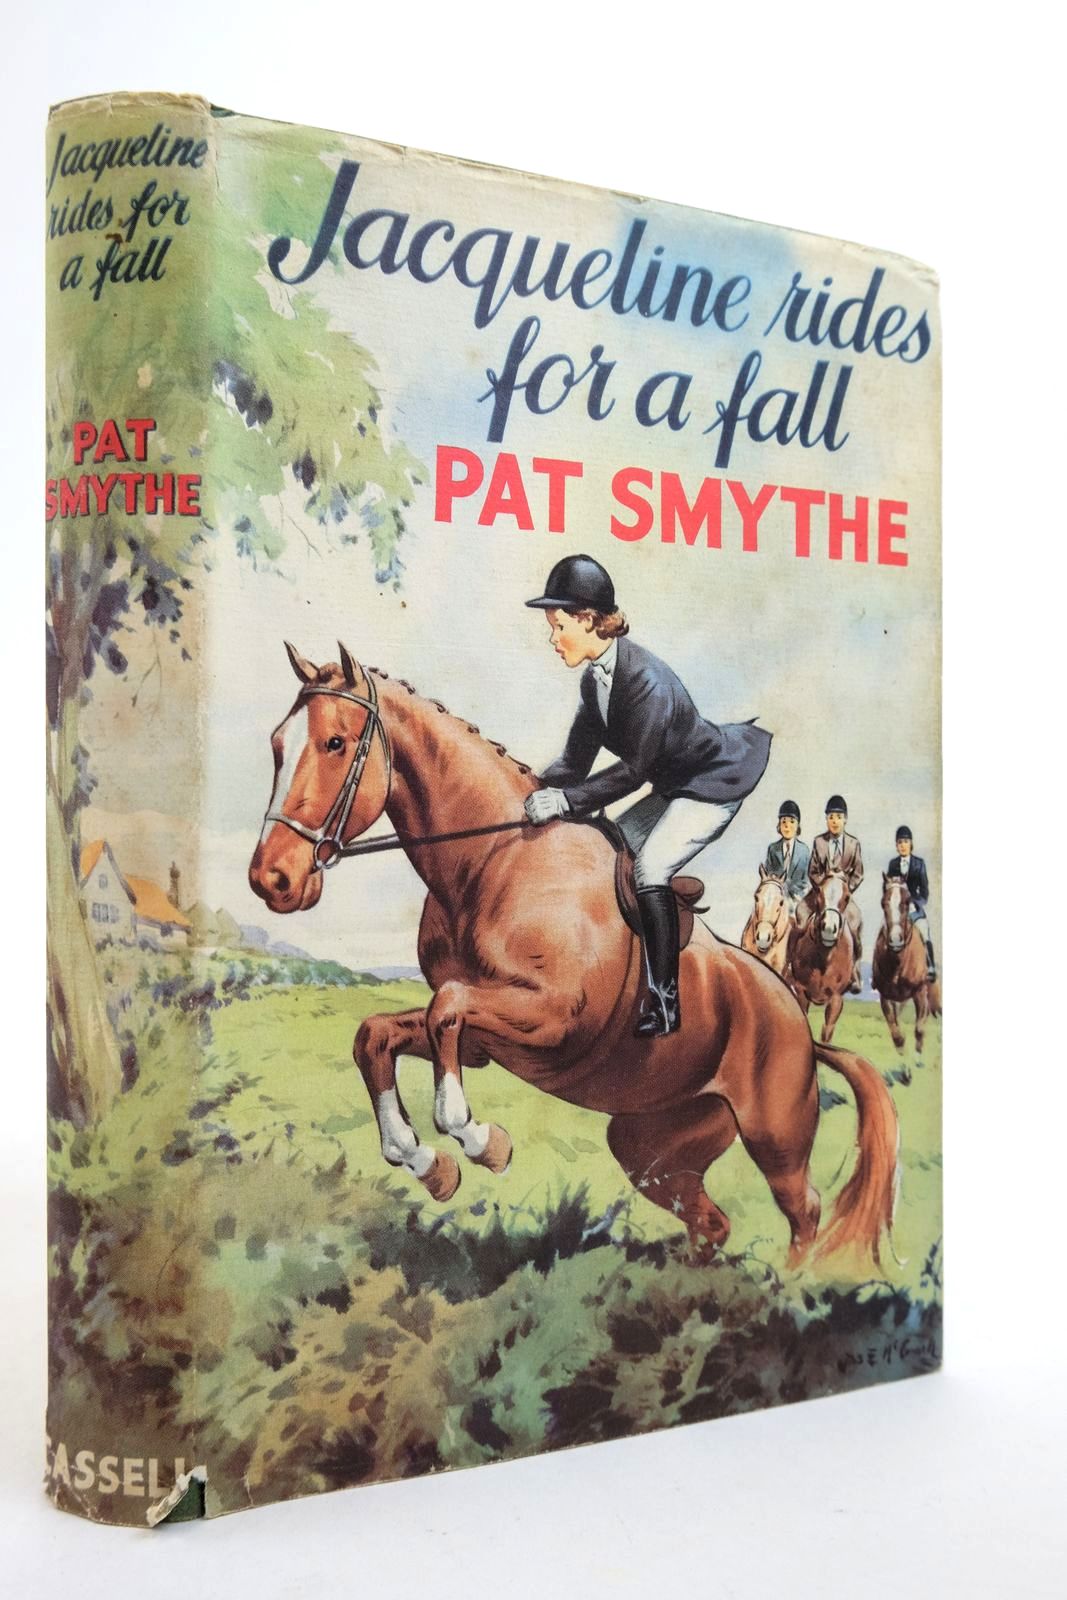 Photo of JACQUELINE RIDES FOR A FALL written by Smythe, Pat illustrated by McConnell, J.E. published by Cassell &amp; Company Ltd (STOCK CODE: 2140624)  for sale by Stella & Rose's Books